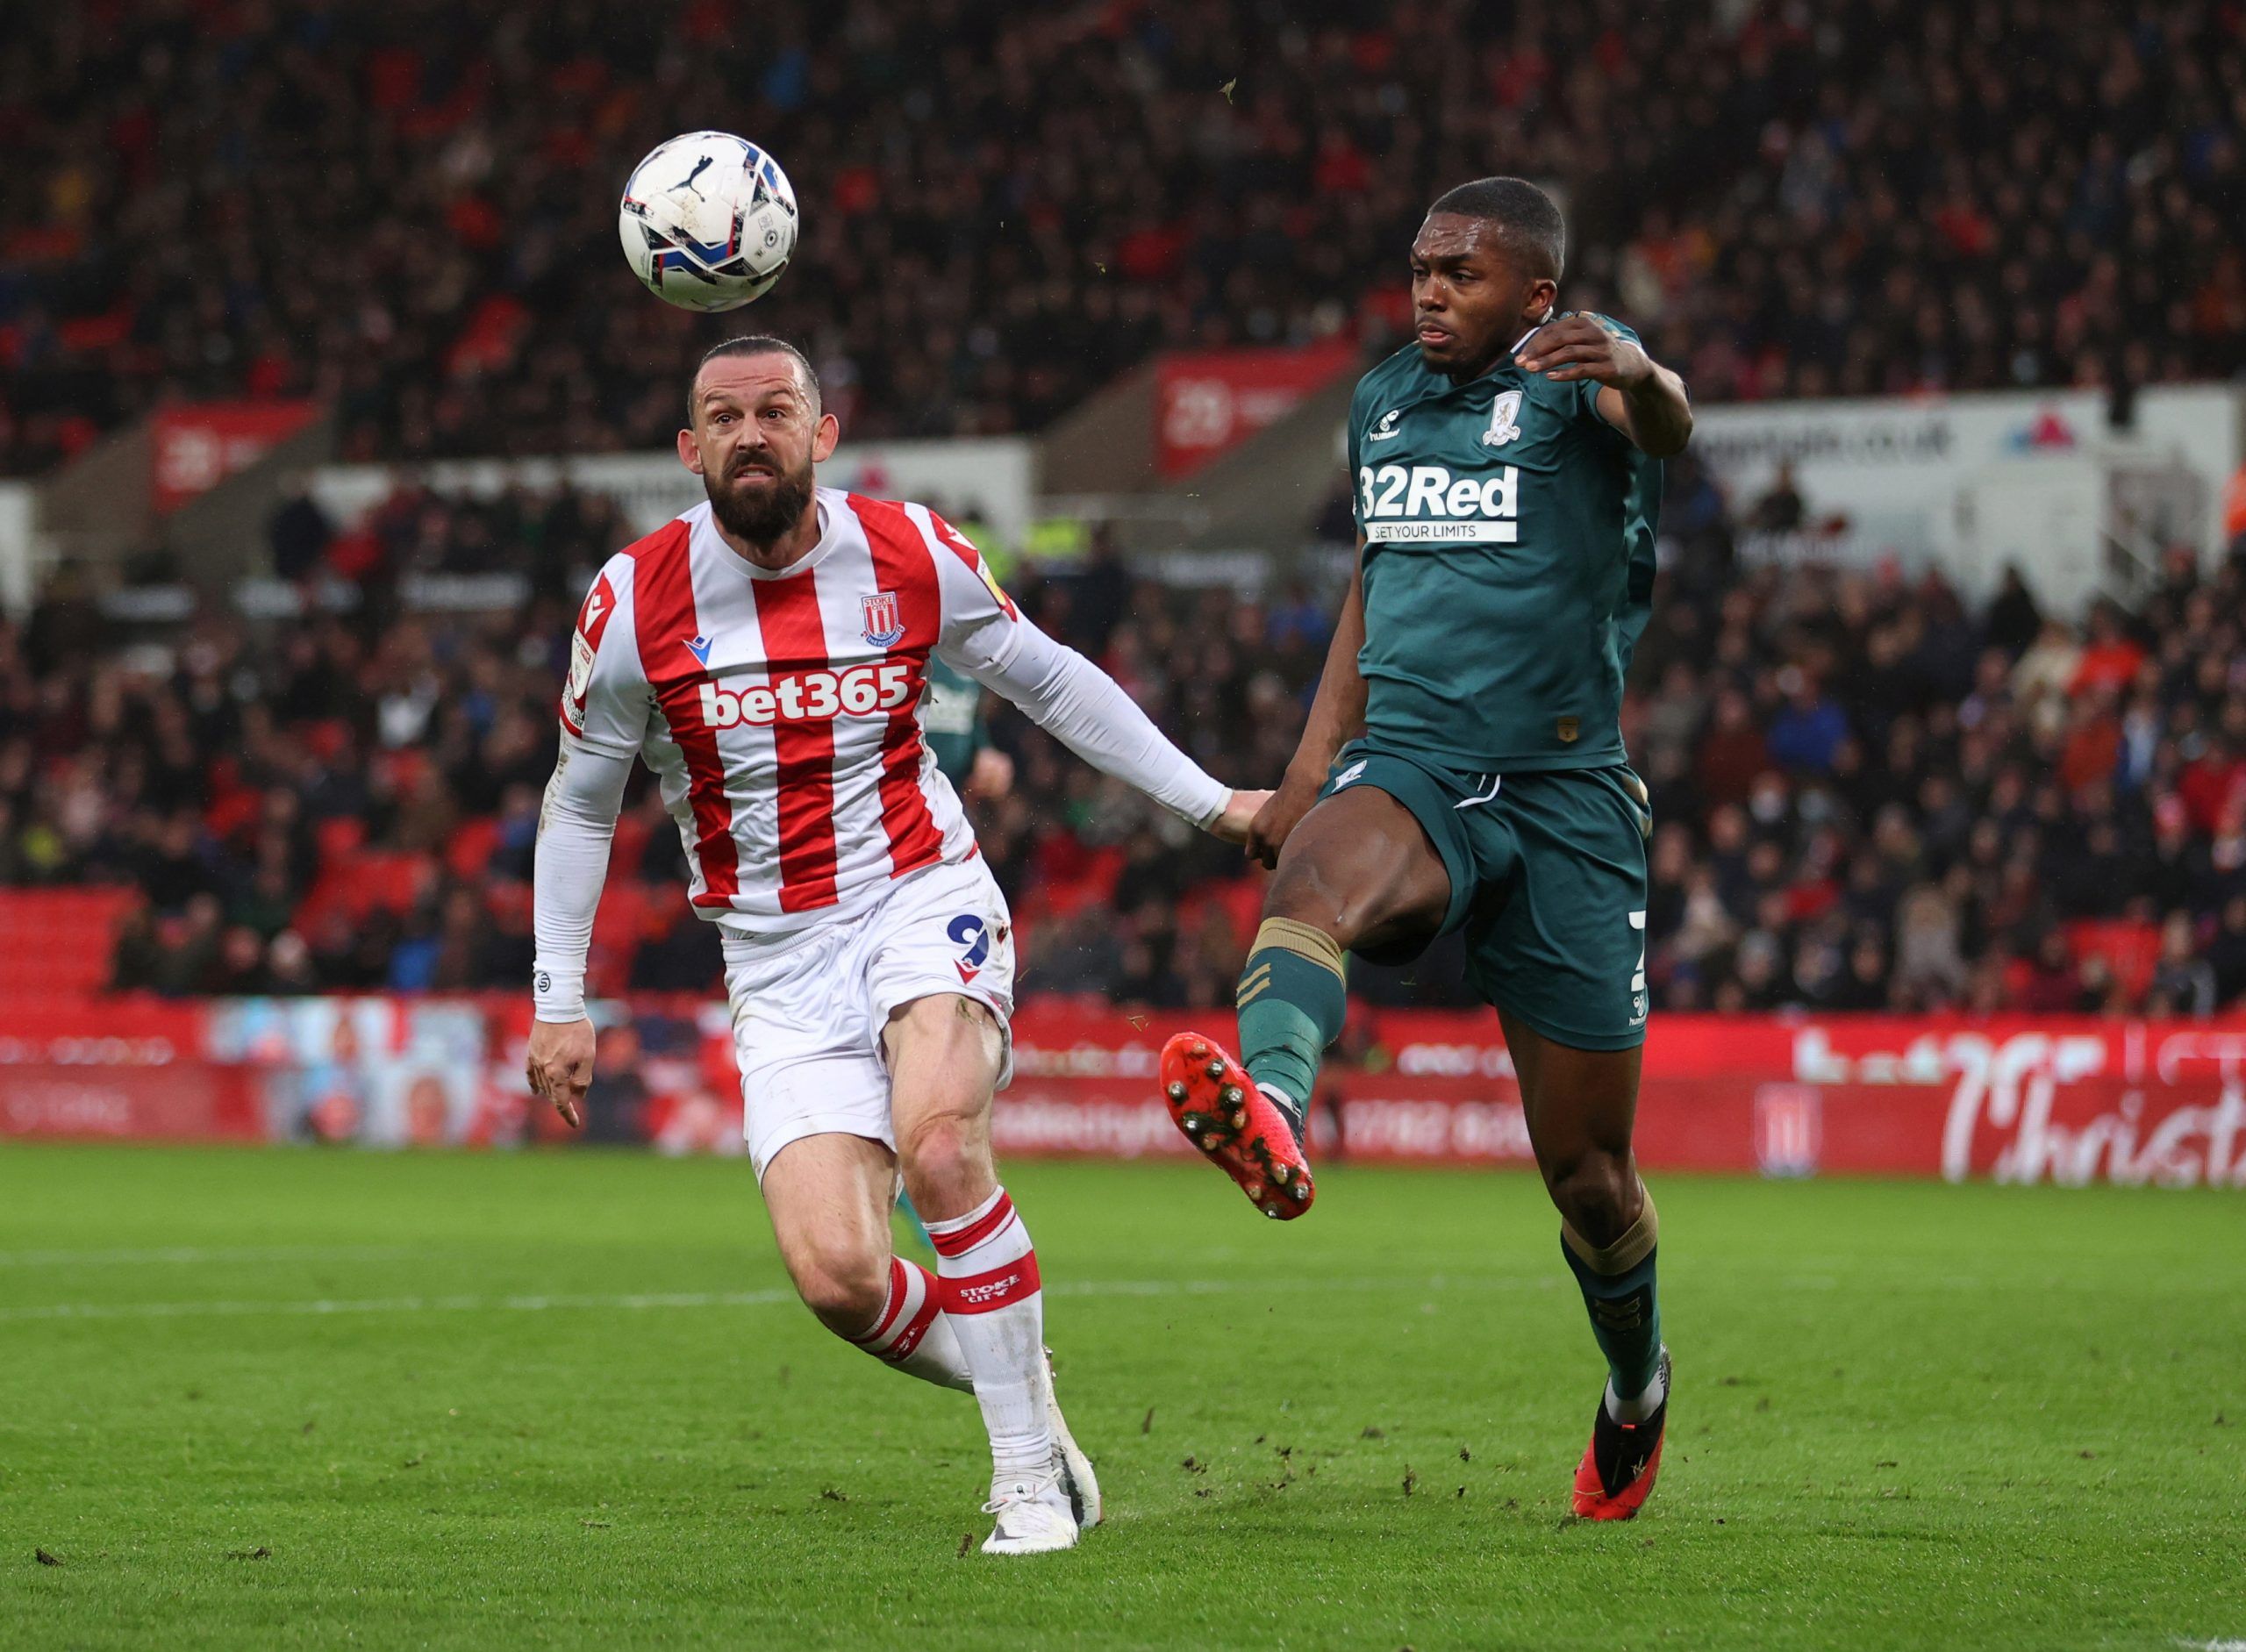 Soccer Football - Championship - Stoke City v Middlesbrough - bet365 Stadium, Stoke-on-Trent, Britain - December 11, 2021  Stoke City's Steven Fletcher in action with Middlesbrough's Anfernee Dijksteel  Action Images/John Clifton  EDITORIAL USE ONLY. No use with unauthorized audio, video, data, fixture lists, club/league logos or 